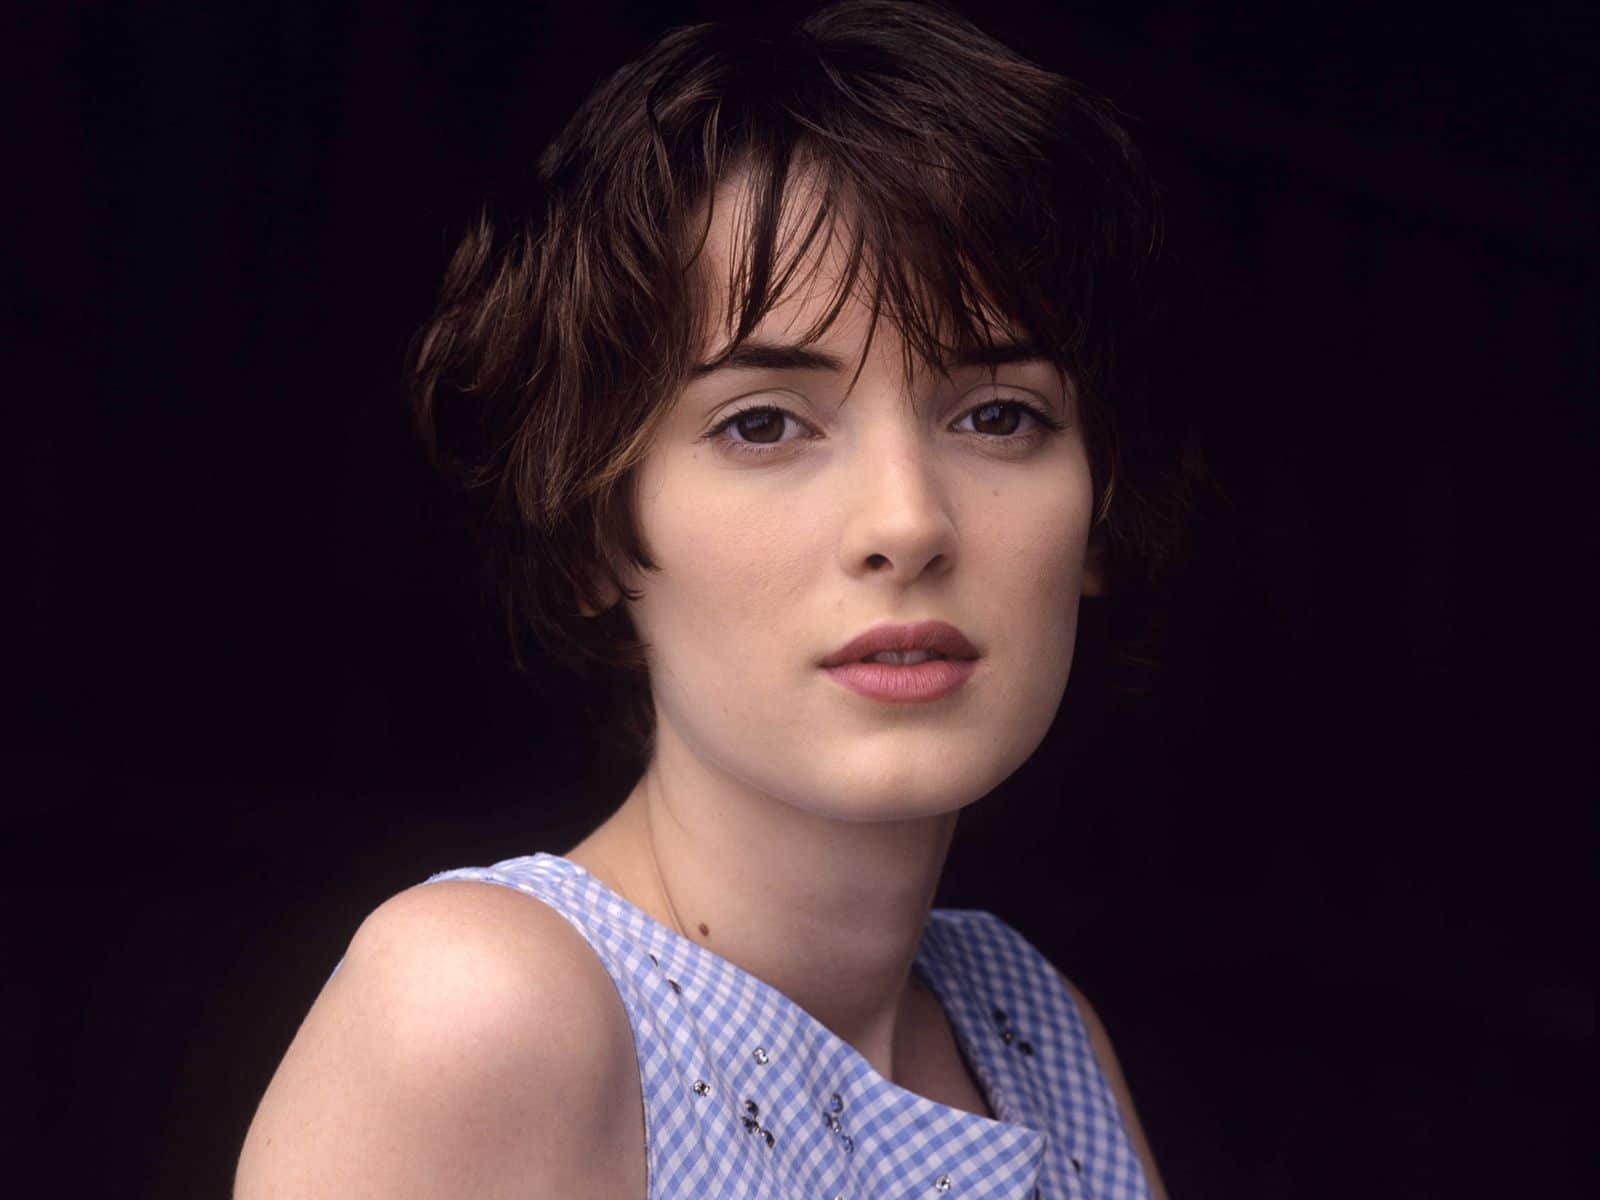 Winona Ryder was not considered pretty enough to be an actress